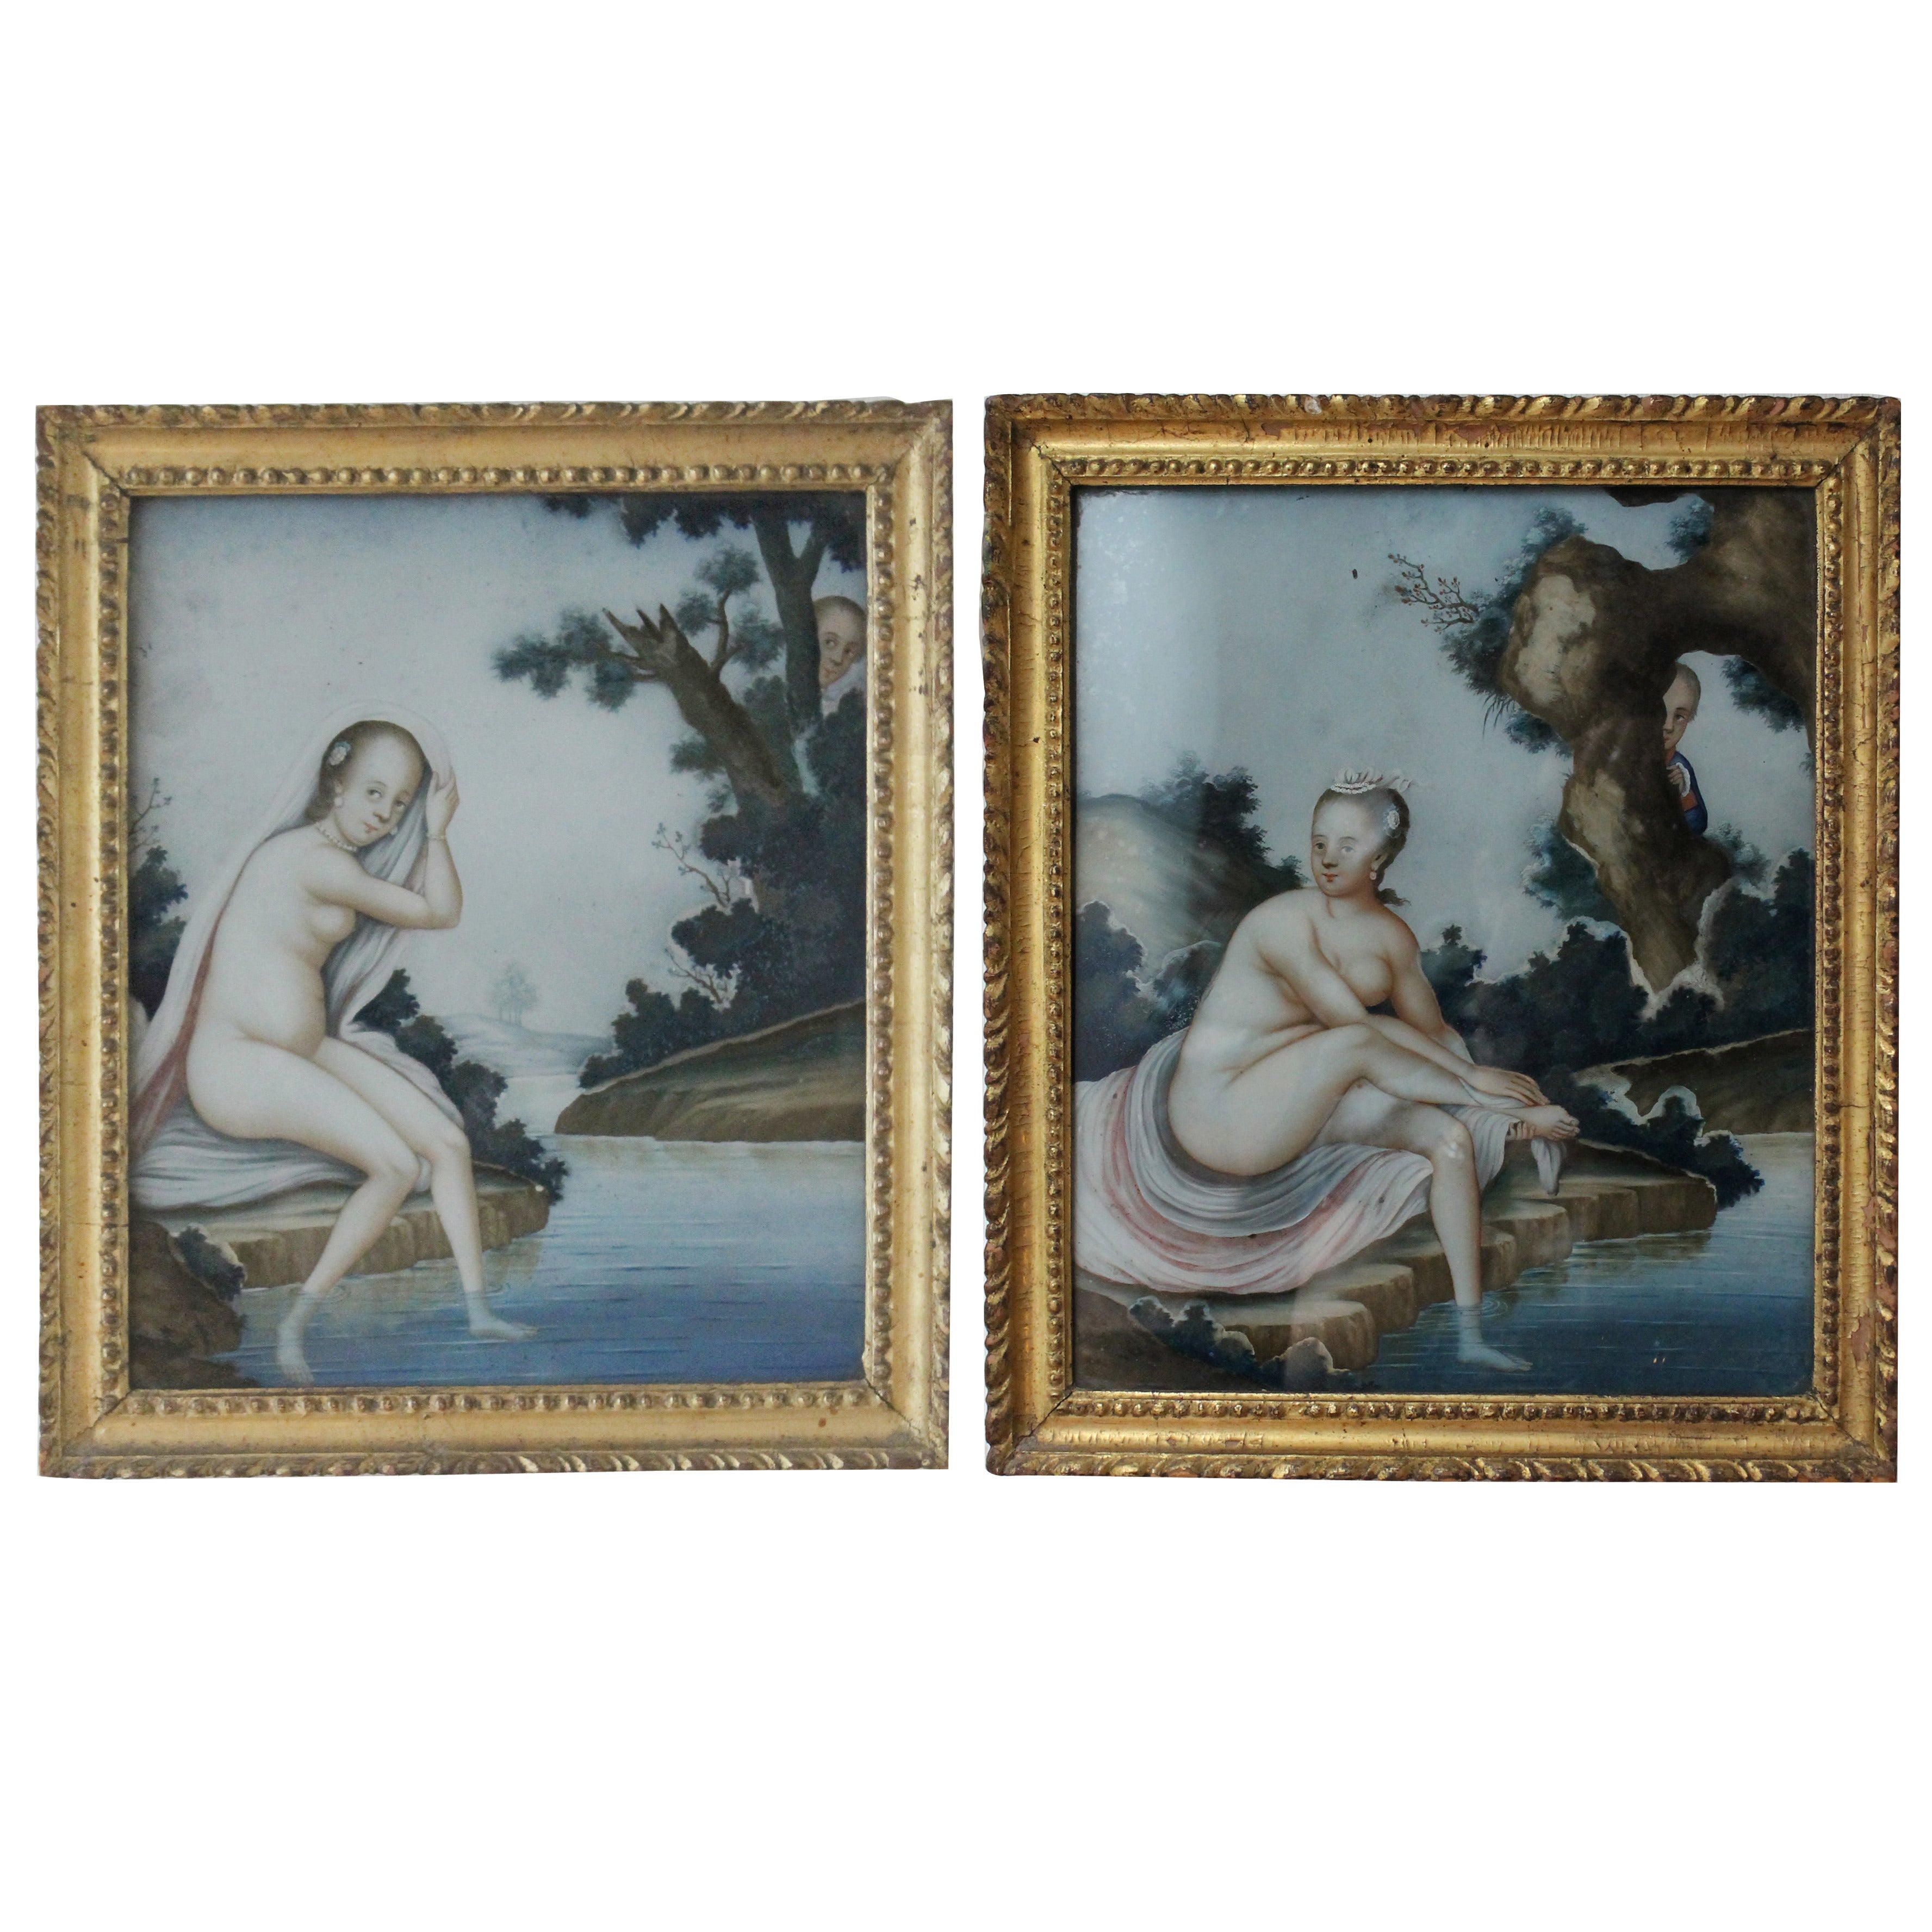 Pair of Chinese Export European Subject Reverse Paintings on Glass, 18th Century